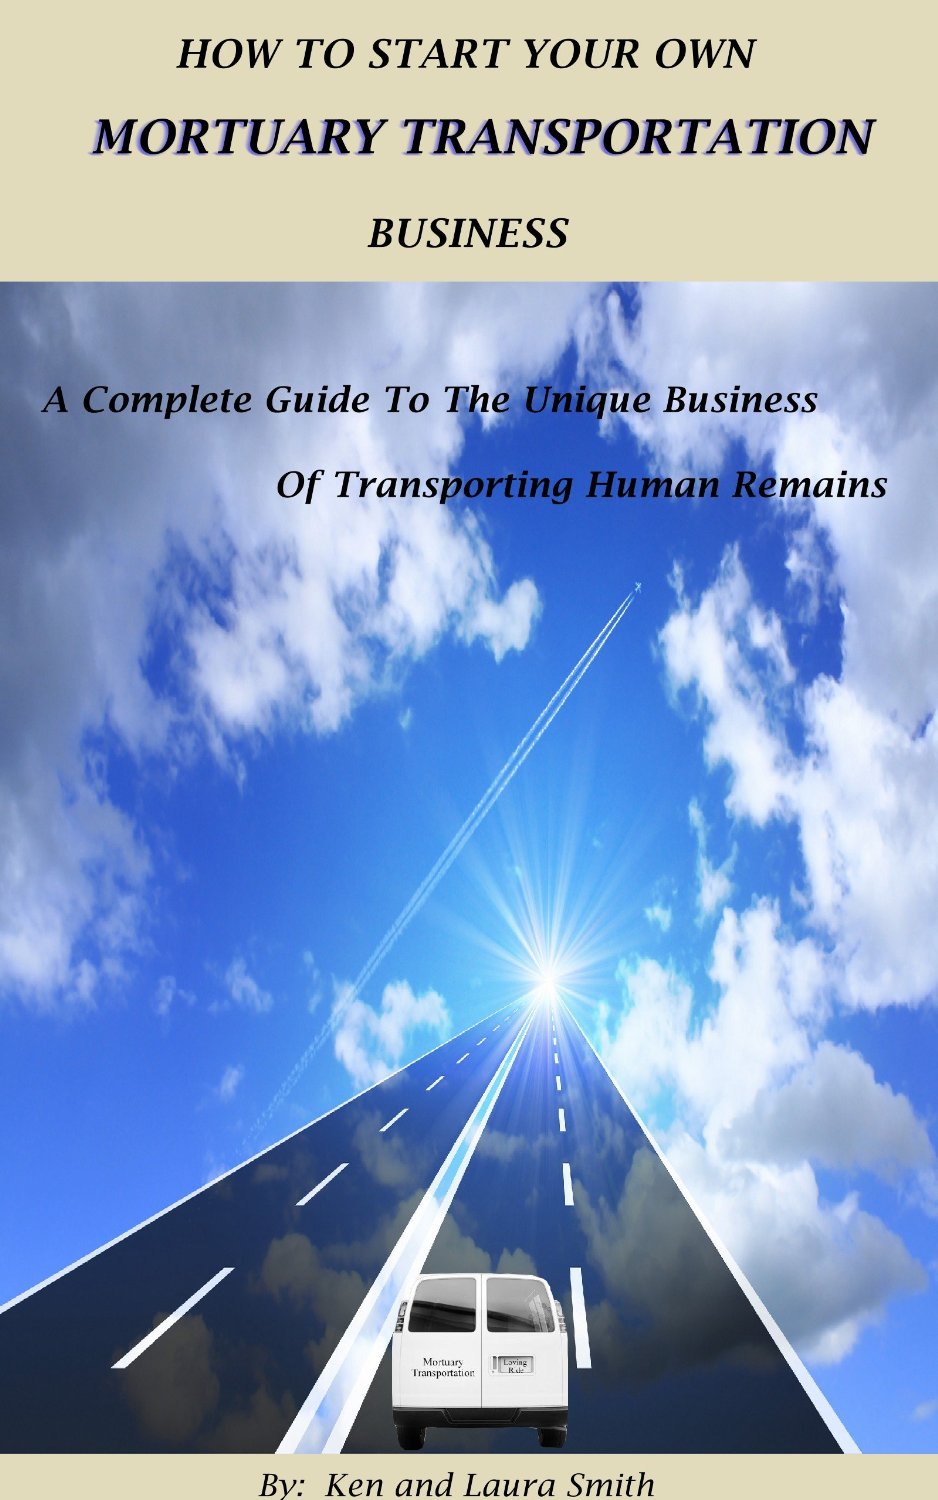 How To Start Your Own Mortuary Transportation Business by Laura Smith